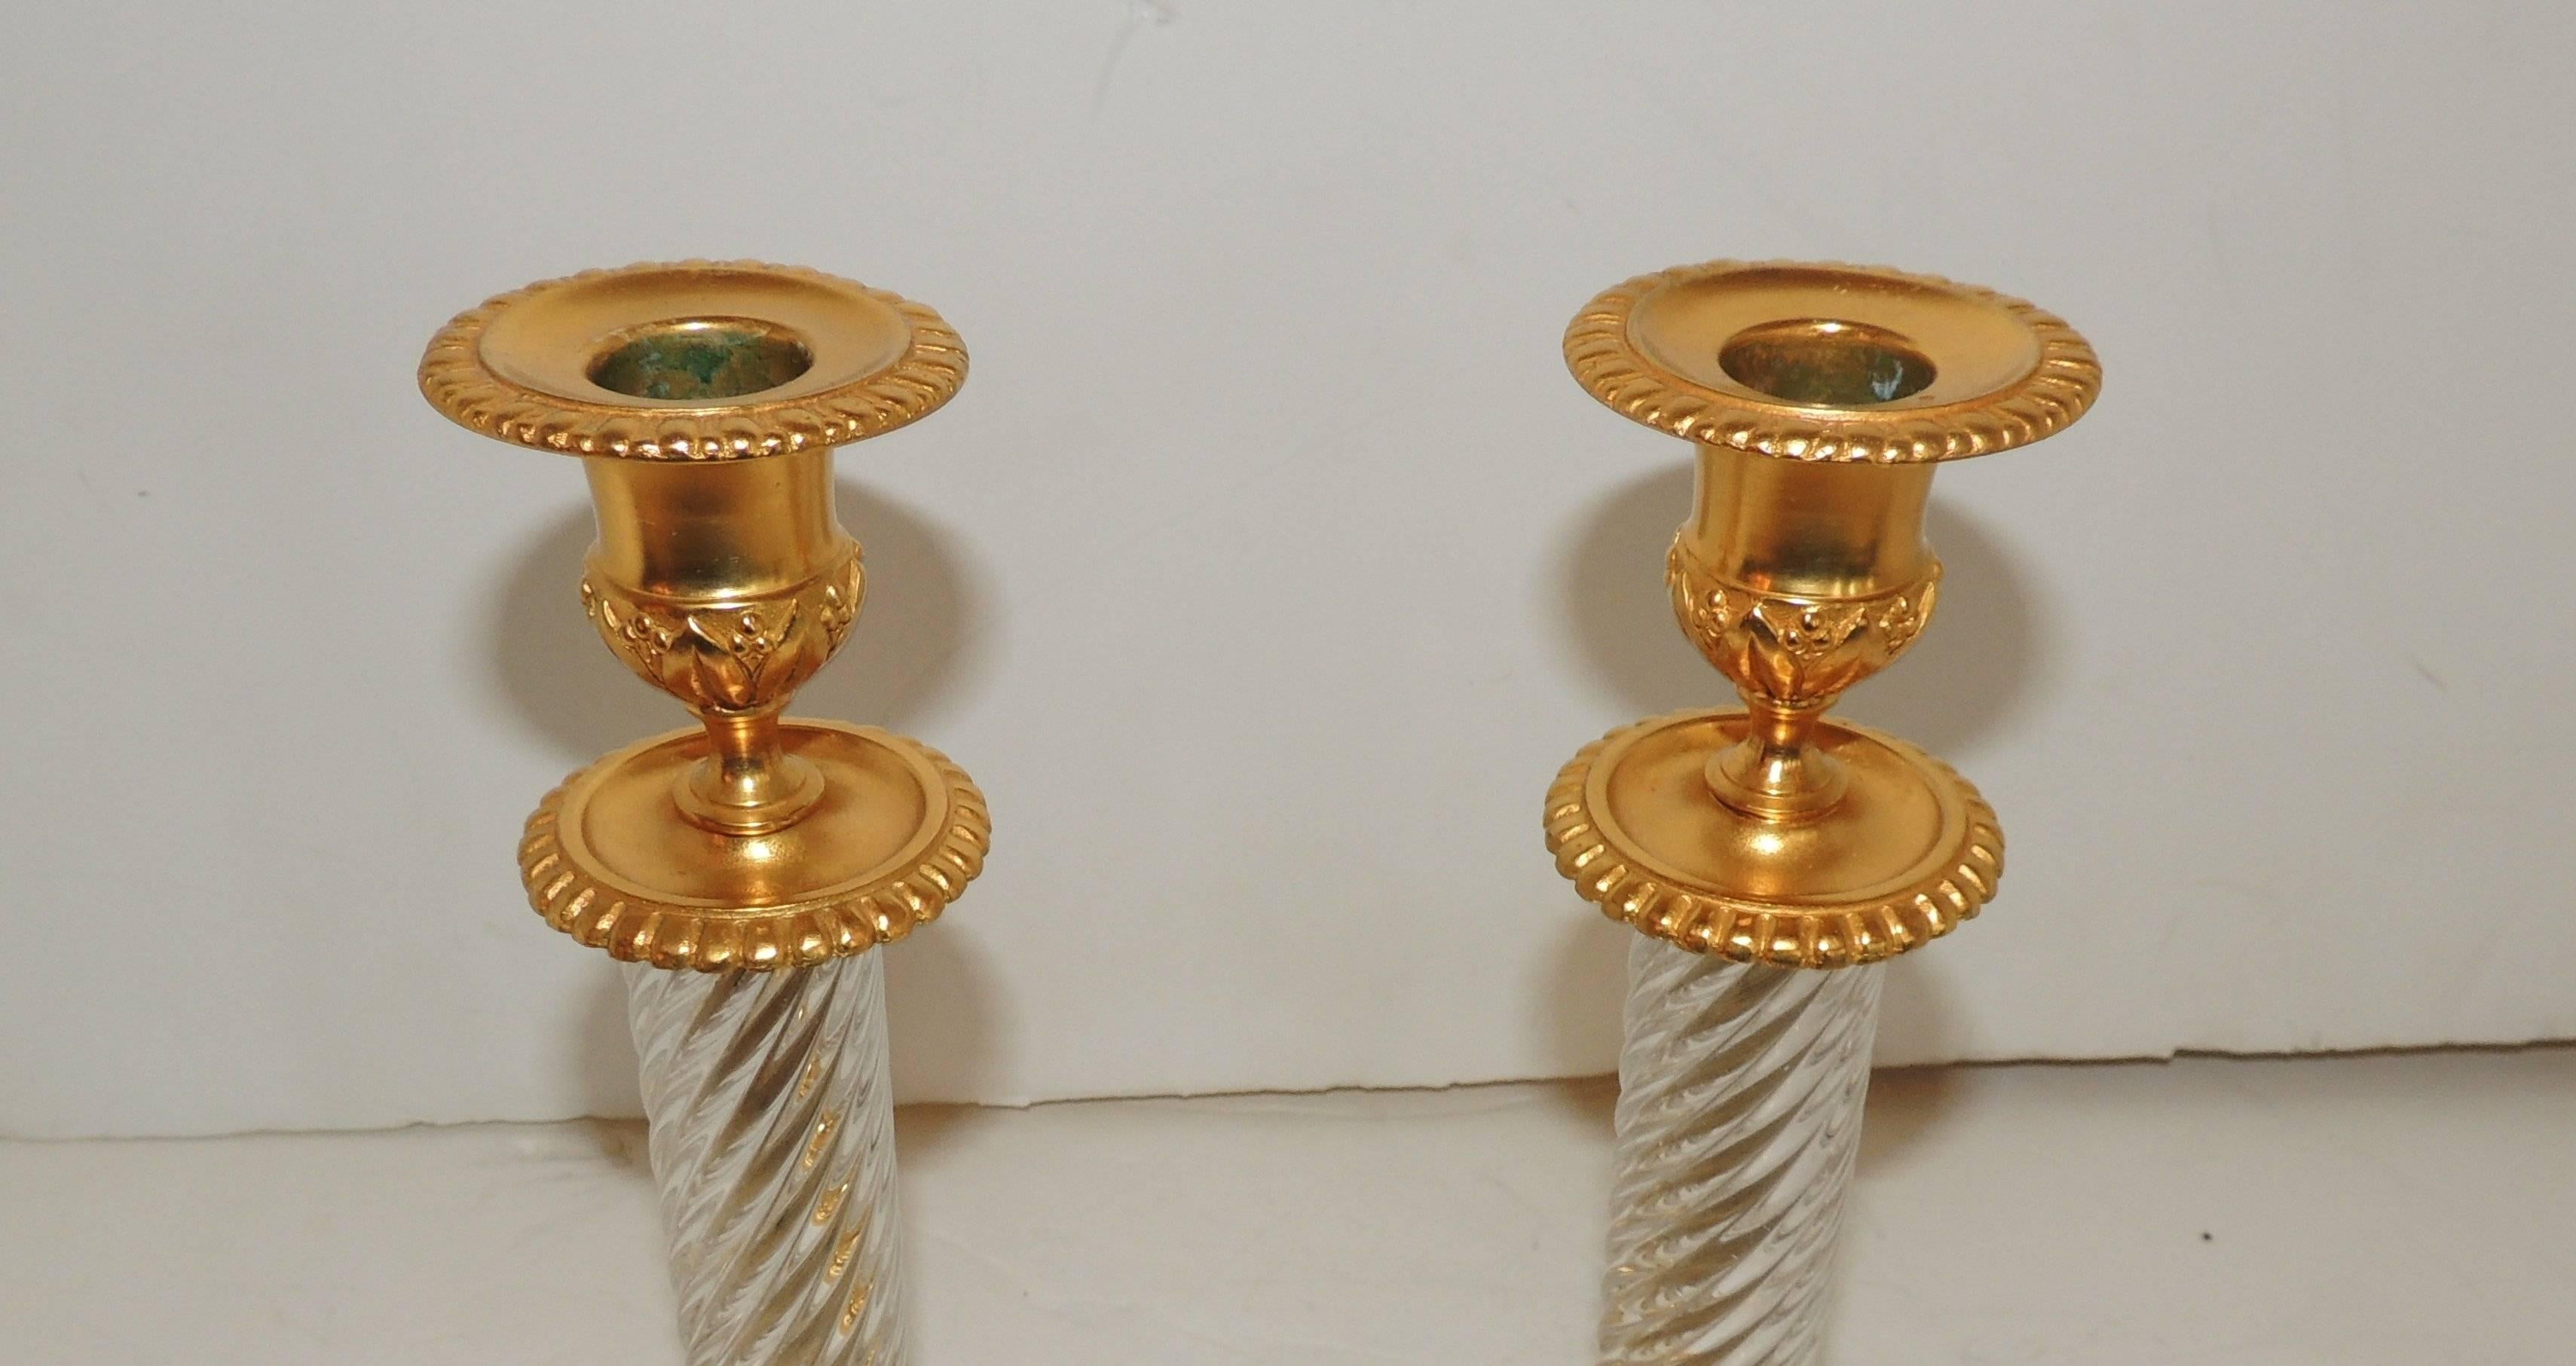 20th Century French Pair of Baccarat Empire Doré Cut Crystal Ormolu-Mounted Candlesticks